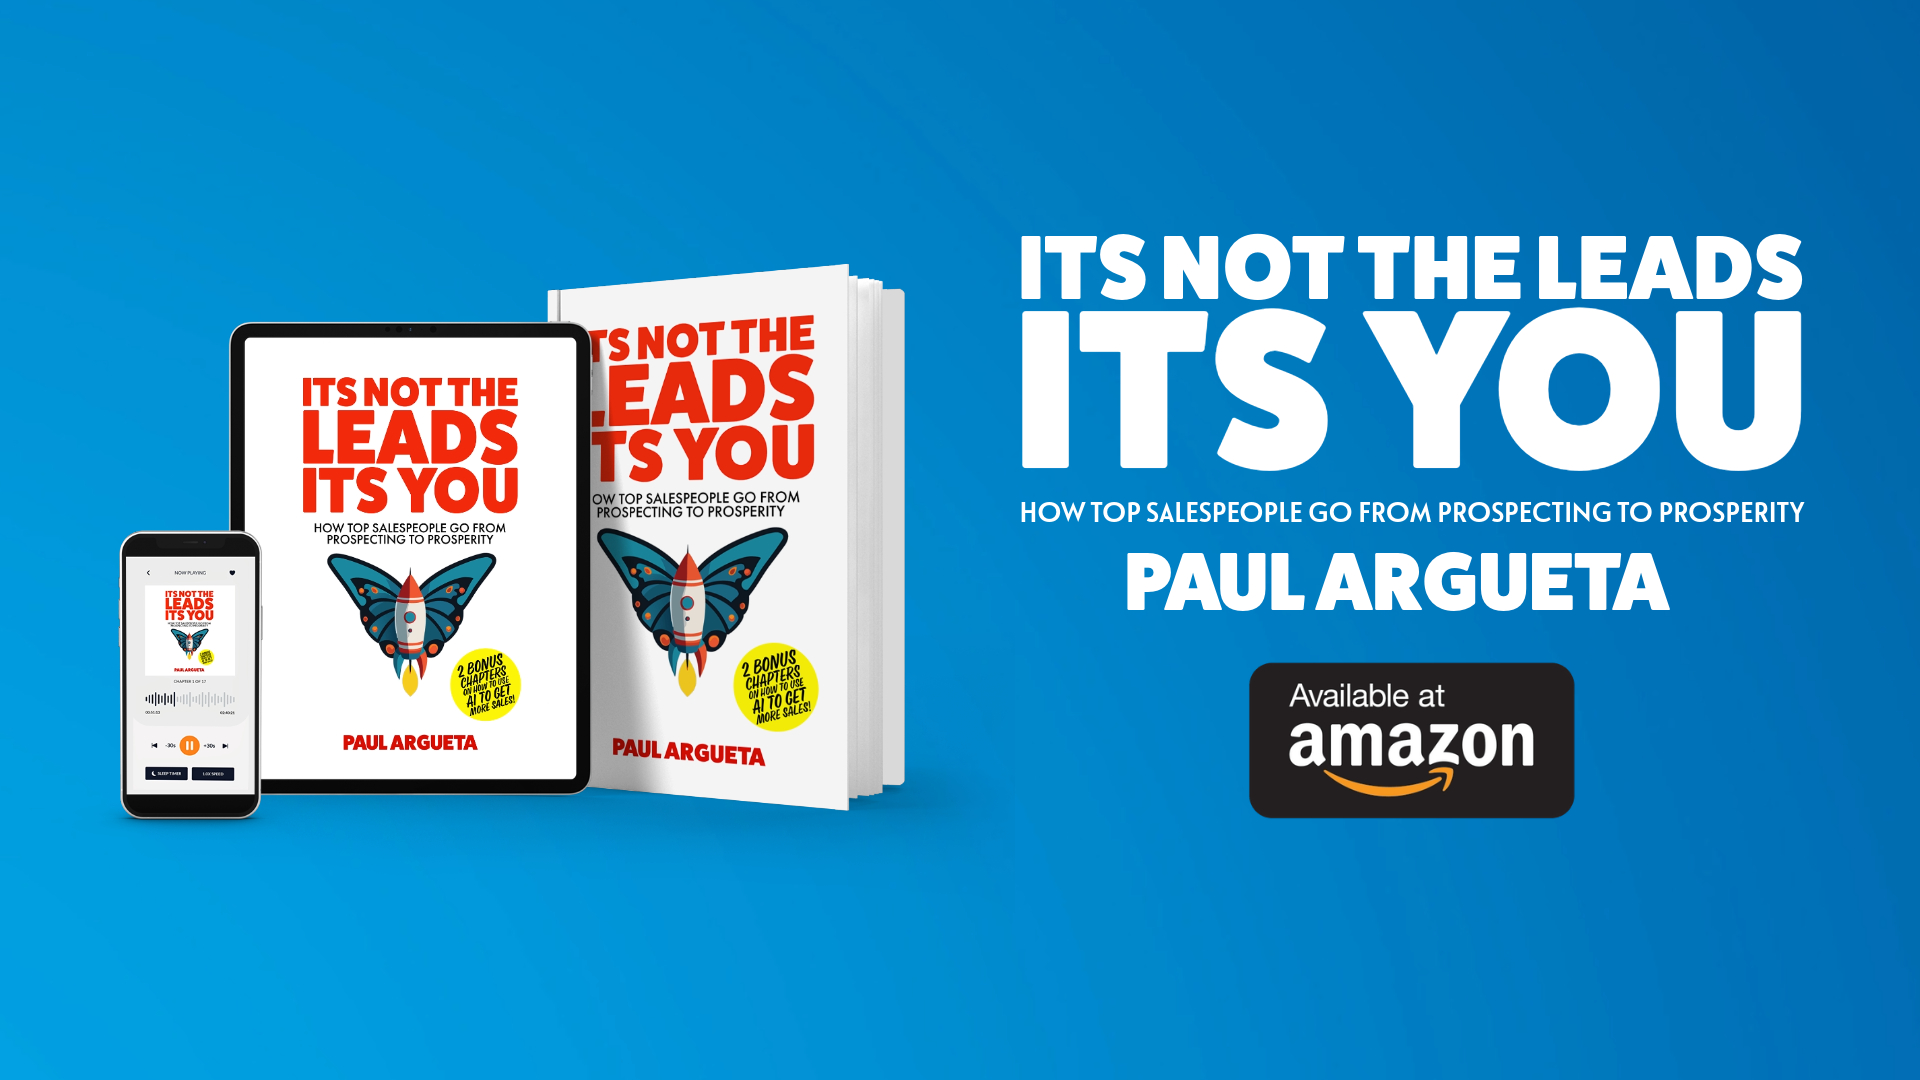 Its Not The Leads Its You Book Available on Amazon Paul Argueta Written For Top Salespeople Social media Thumbnail